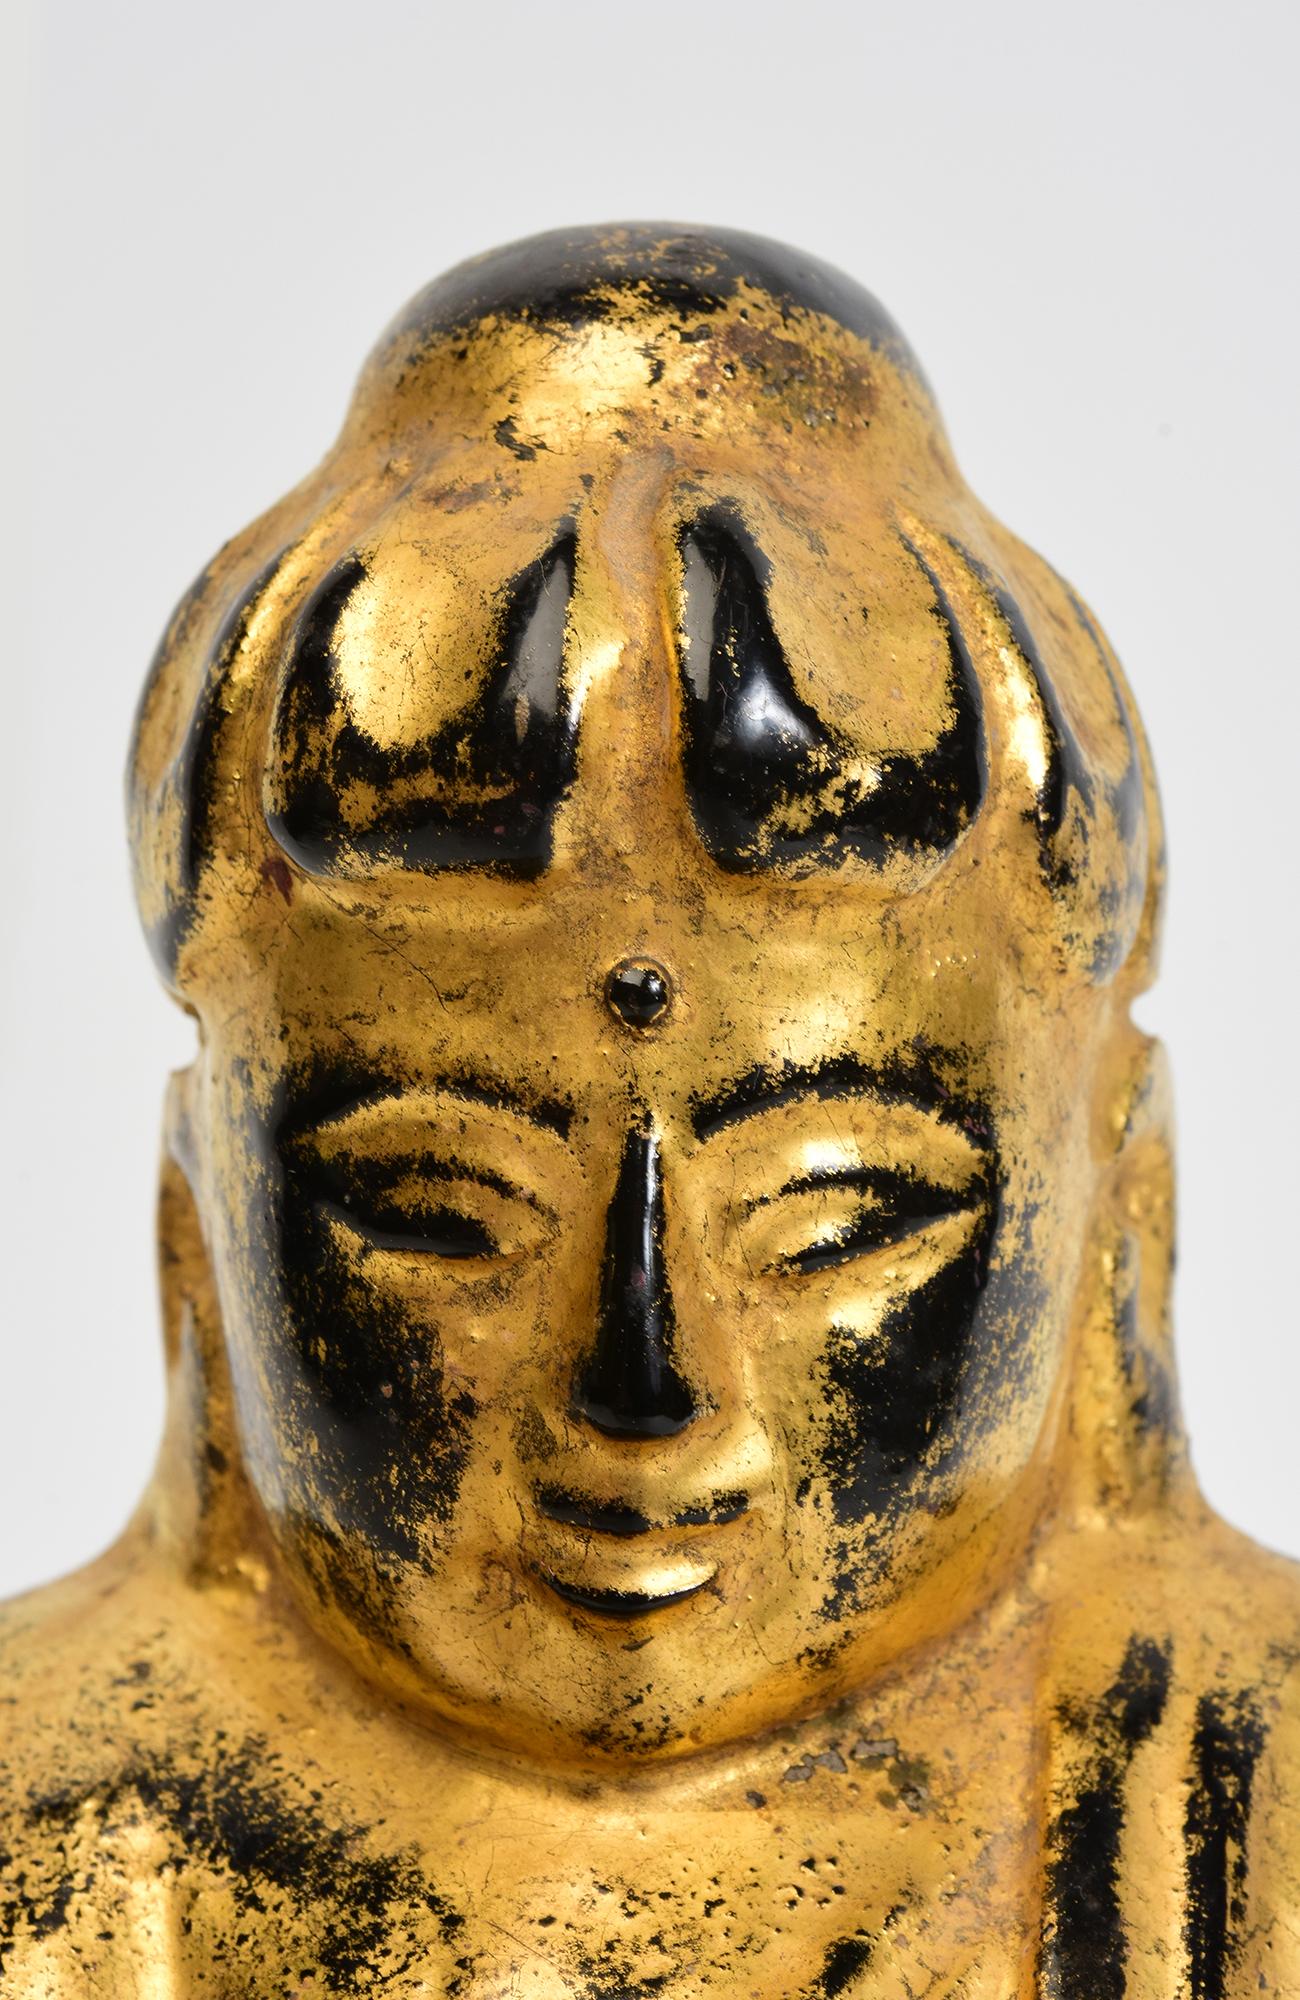 Antique Burmese wooden lotus Buddha sitting in Mara Vijaya (calling the earth to witness) posture on a base, with gilded gold.

Age: Burma, Mandalay Period, 19th Century
Size: Height 25 C.M. / Width 13.6 C.M. / Depth 13.8 C.M.
Condition: Nice